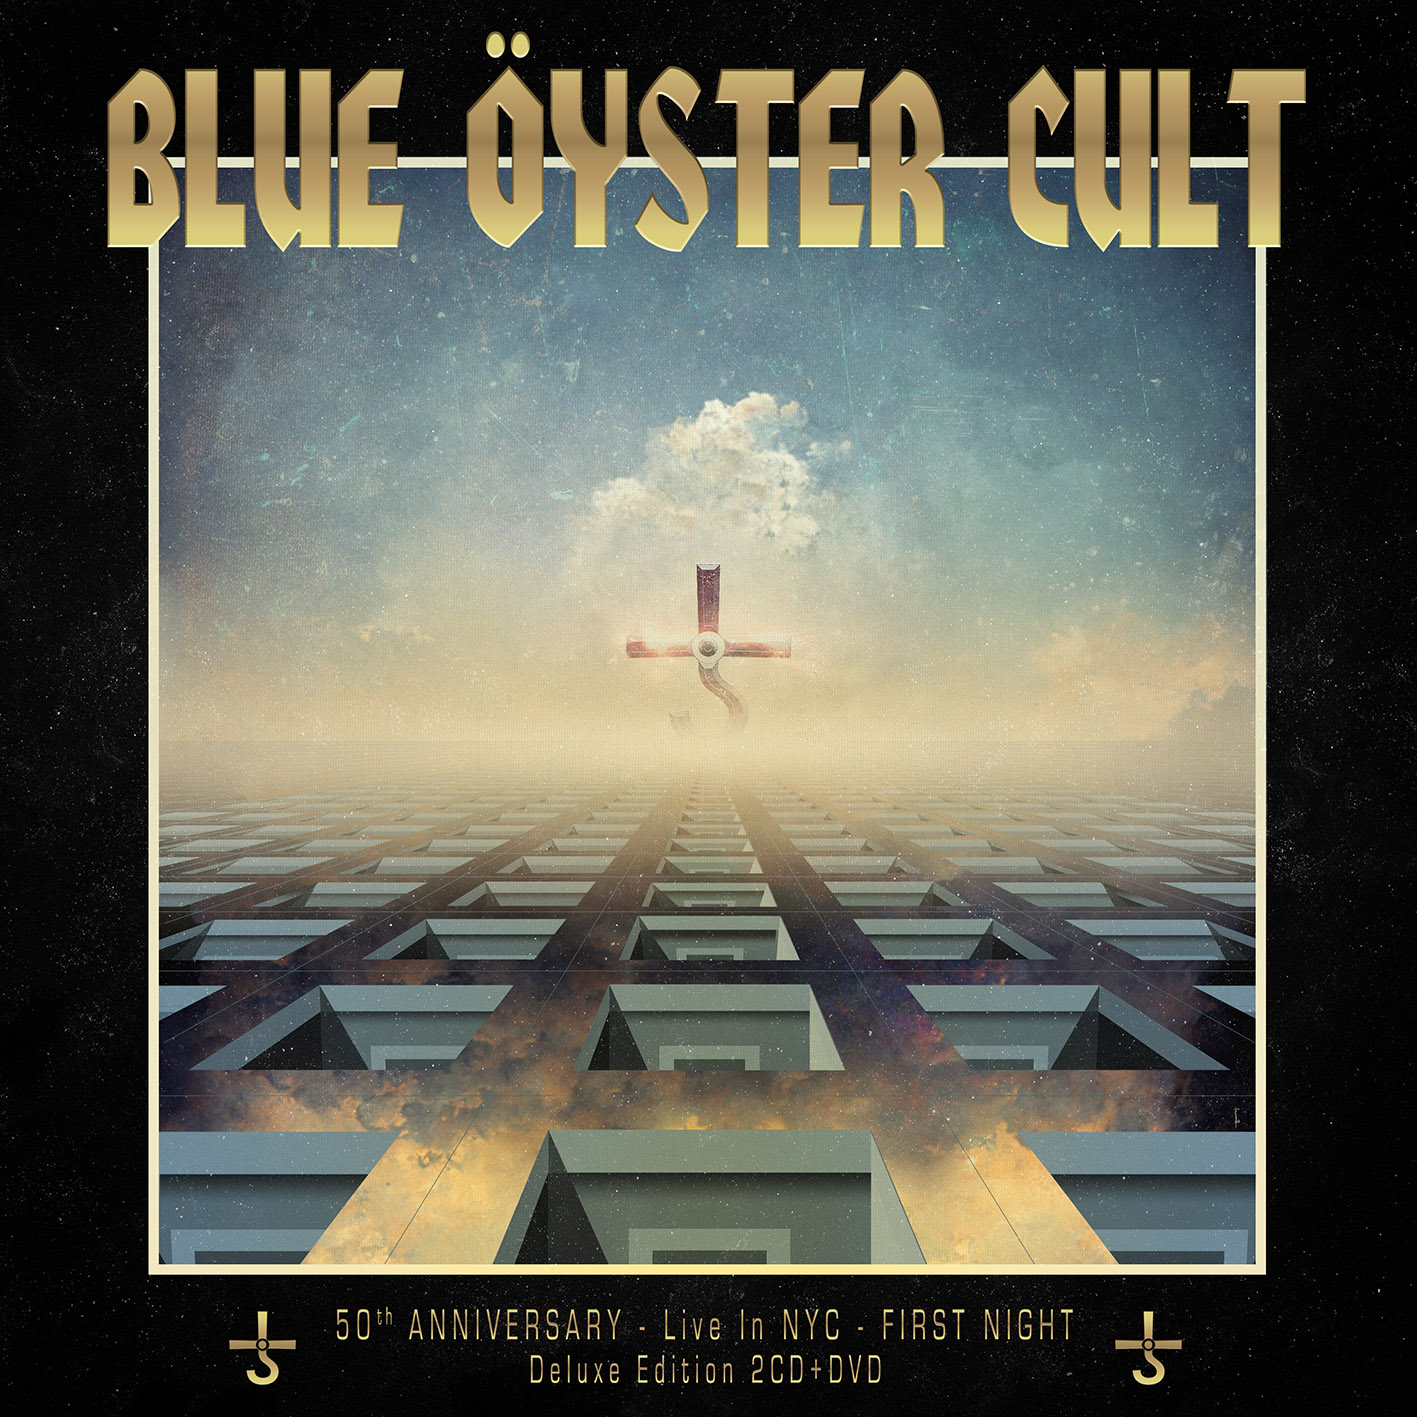 BLUE OYSTER CULT - 50th Anniversary Live – First Night